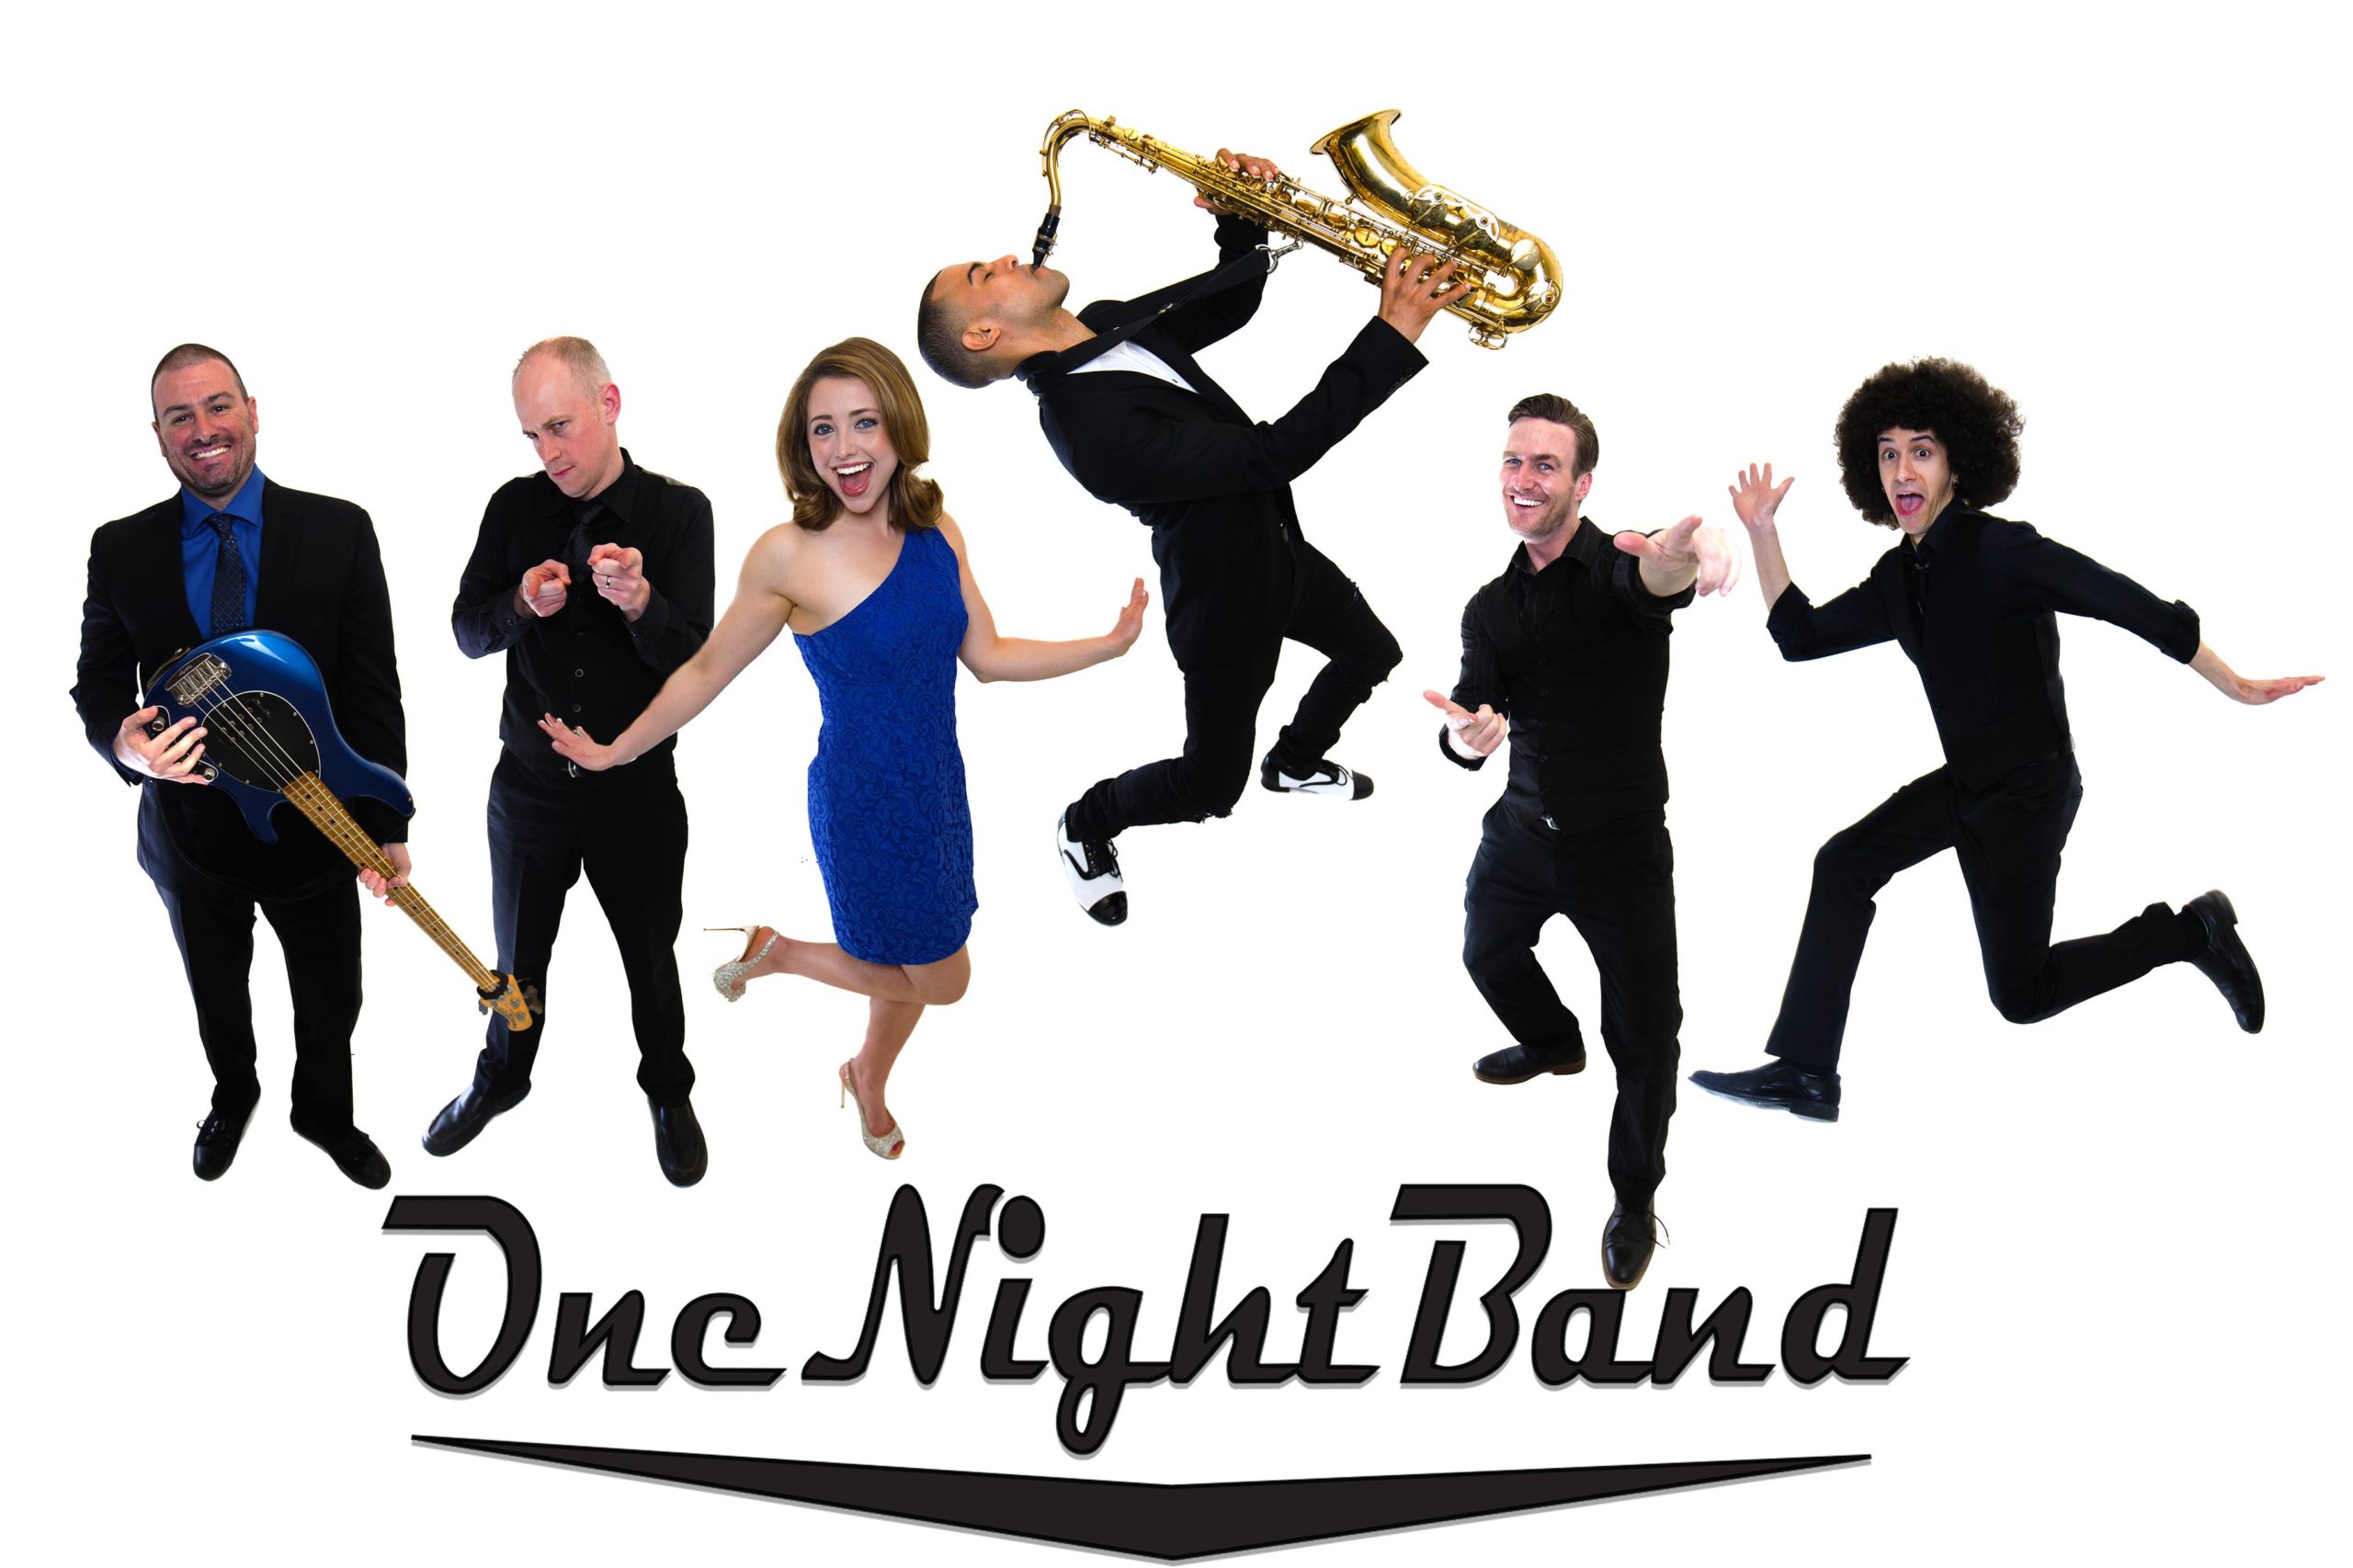 Members of One Night Band.